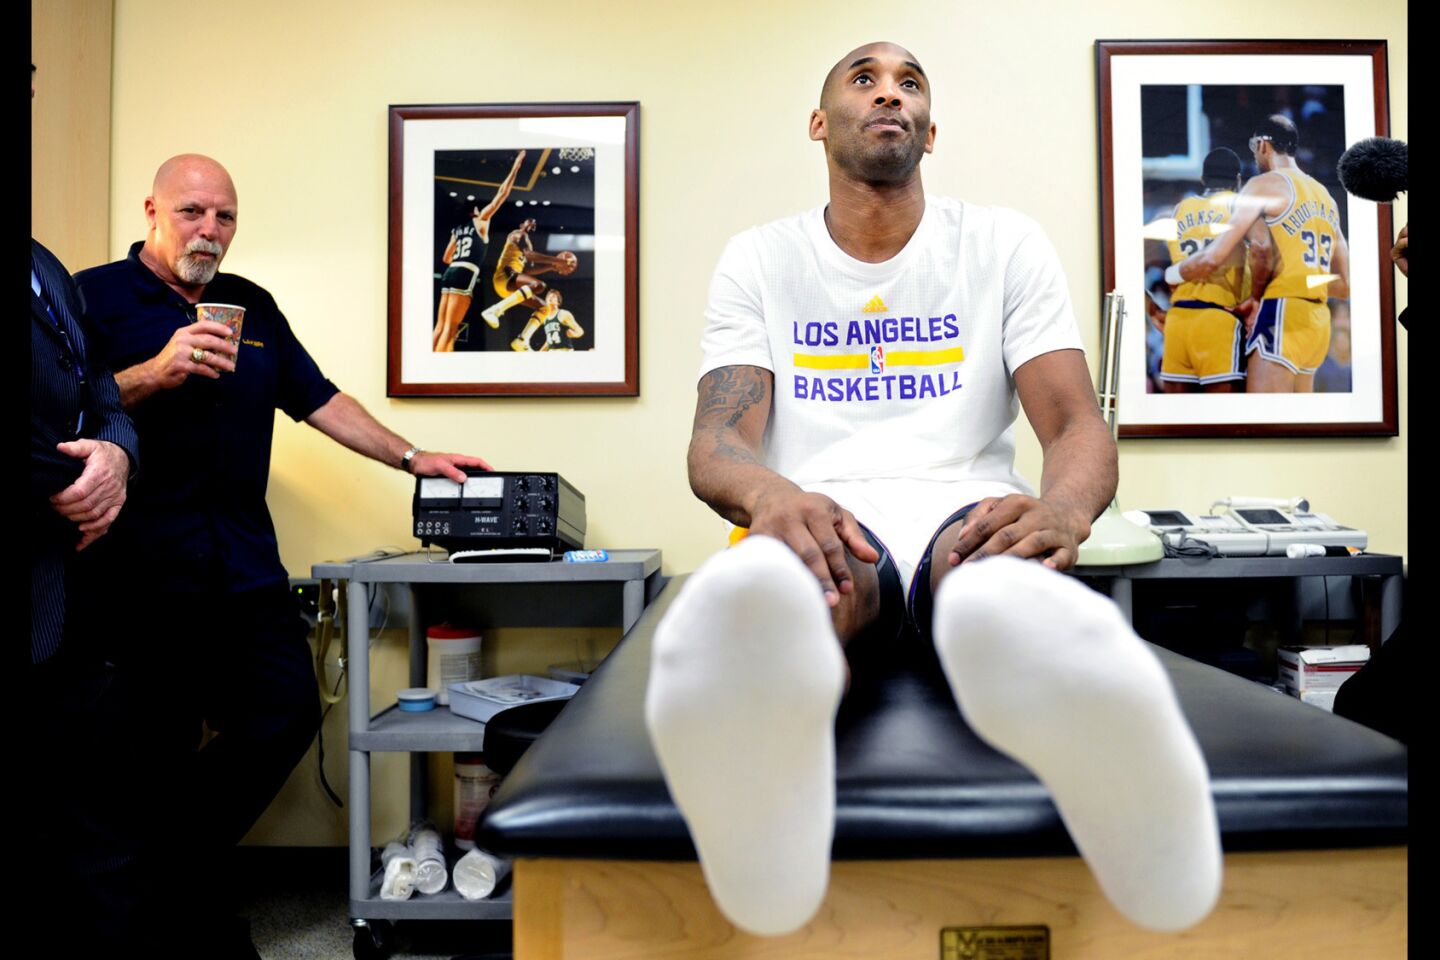 Lakers Kobe Bryant sits on the trainer's table while going through a stretching exercise before a game with the Knicks at the Staples Center.